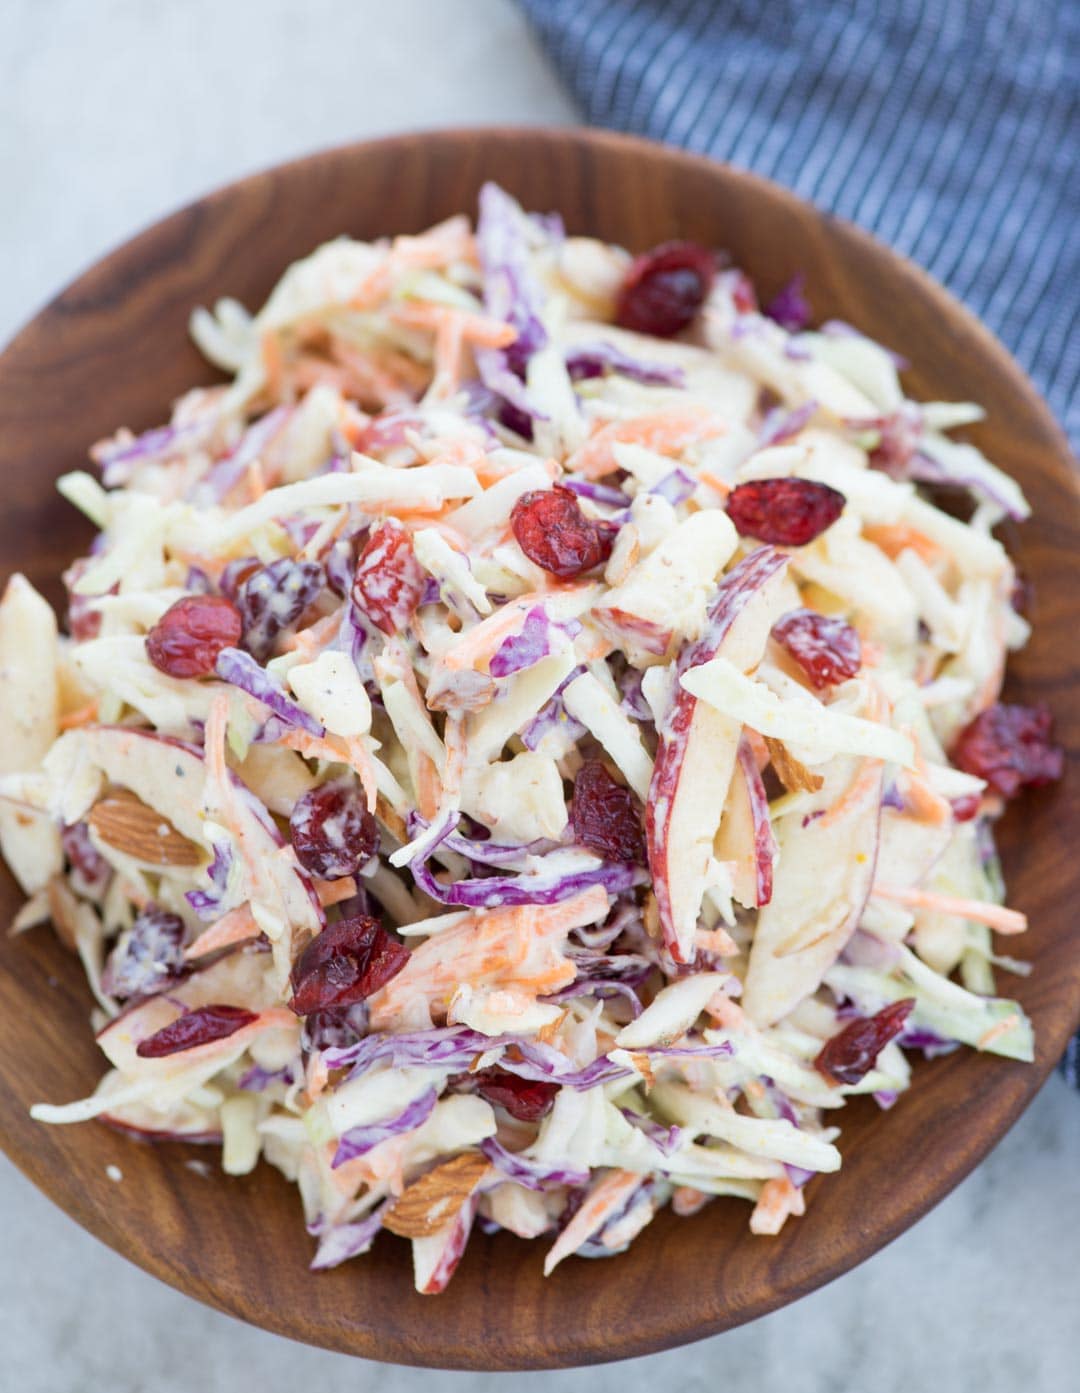 Crunchy apples, Cabbage, carrot, Tart Cranberries in a creamy dressing, this Apple Coleslaw or Apple Slaw is healthy and easy to make. A perfect side dish to serve and can be made in just 10 minutes.